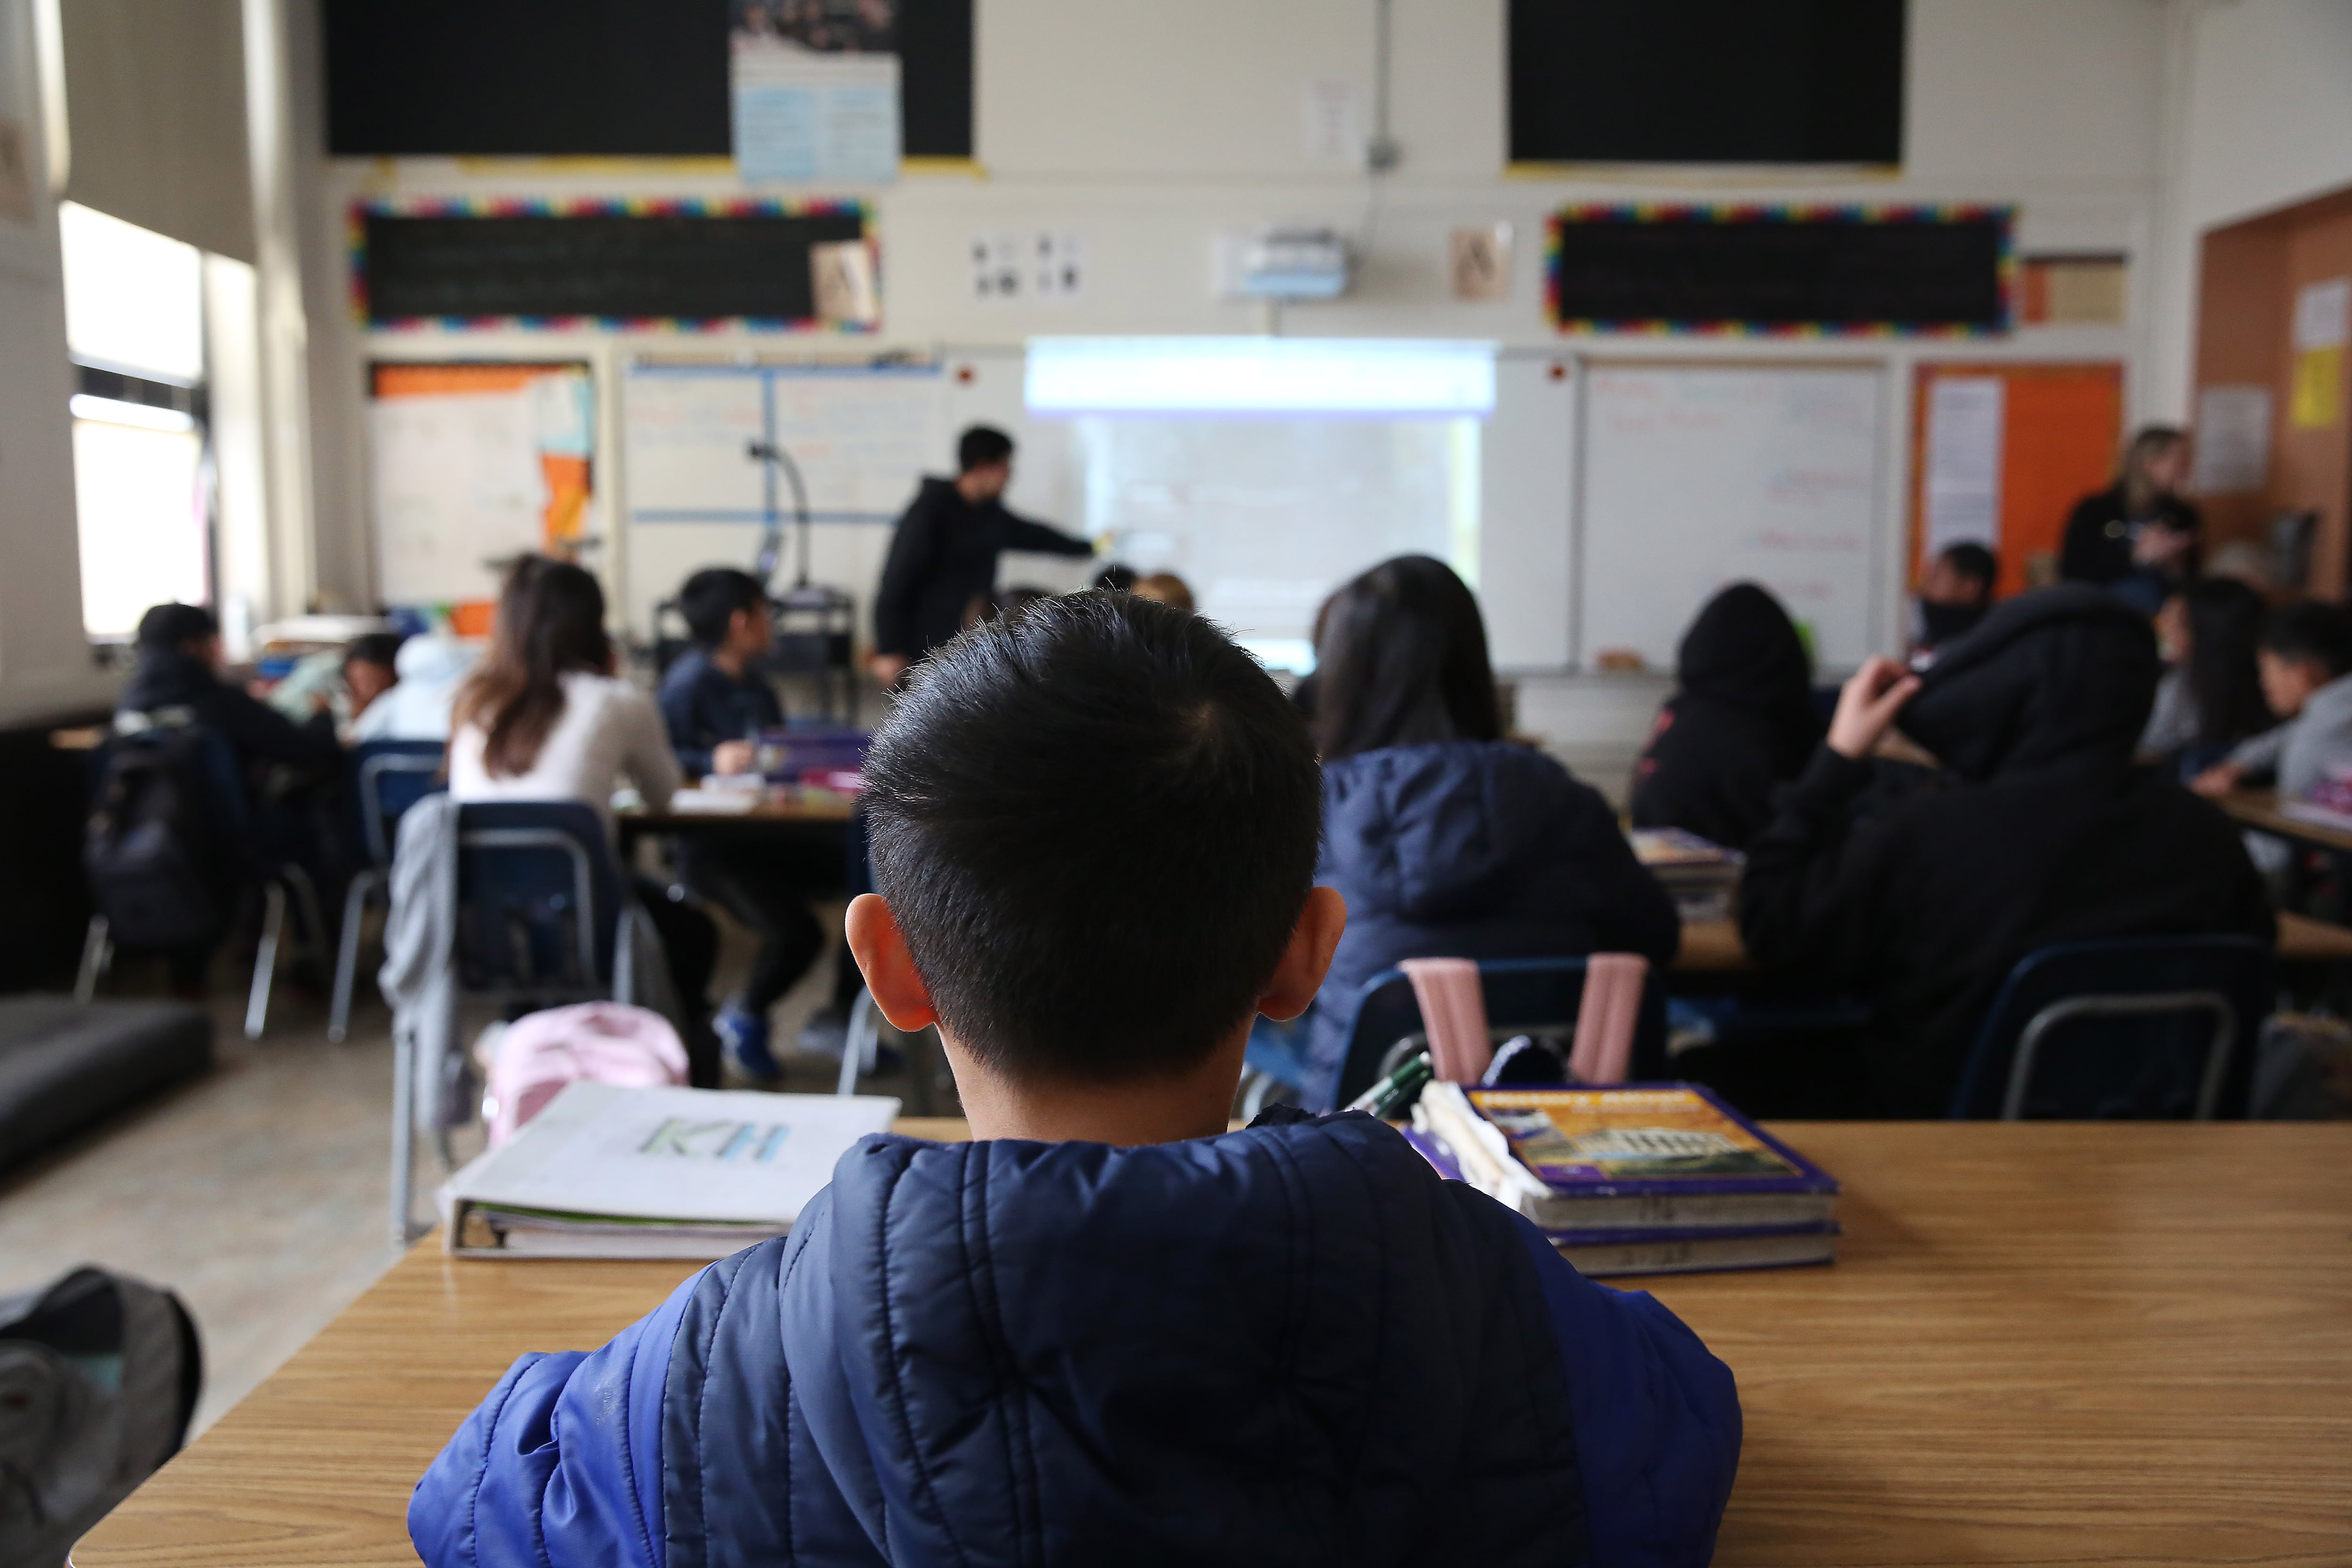 A young boy with short hair sits at a school desk looking ahead and watching as a teacher points to a whiteboard.